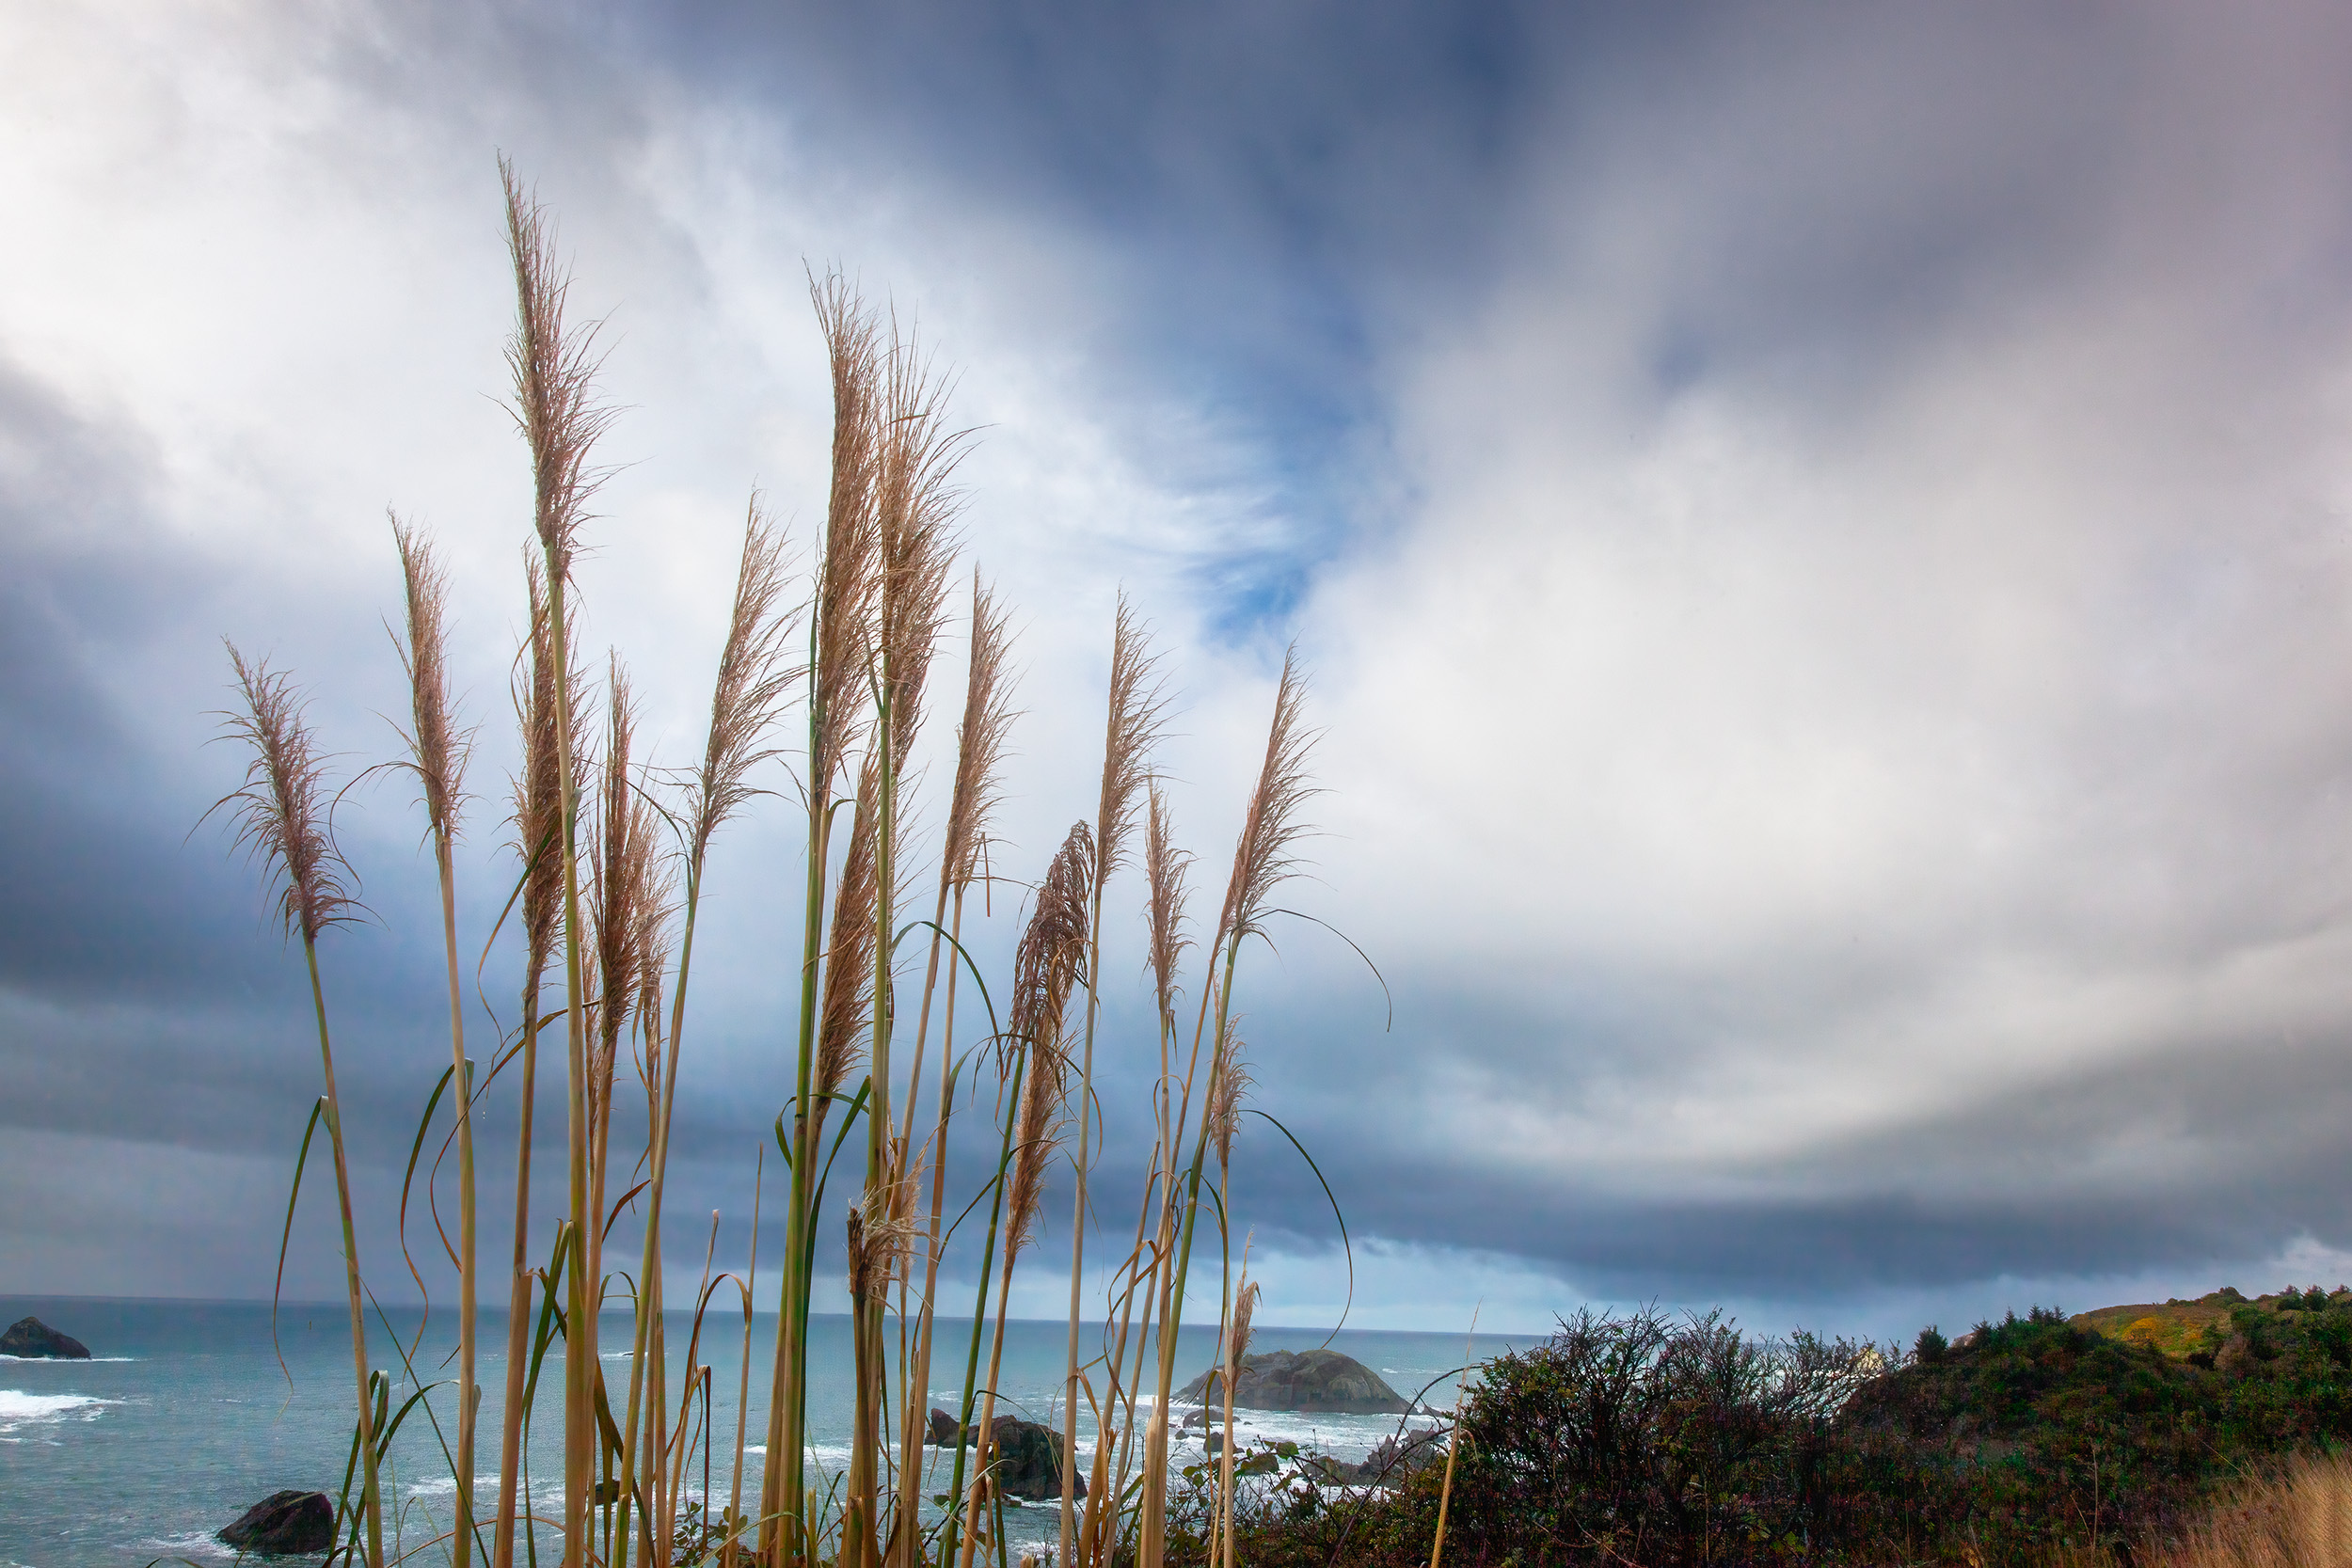 This image, taken along the Oregon coast, brings a close-up view of coastal grasses. Details of drying grass blades stand out...